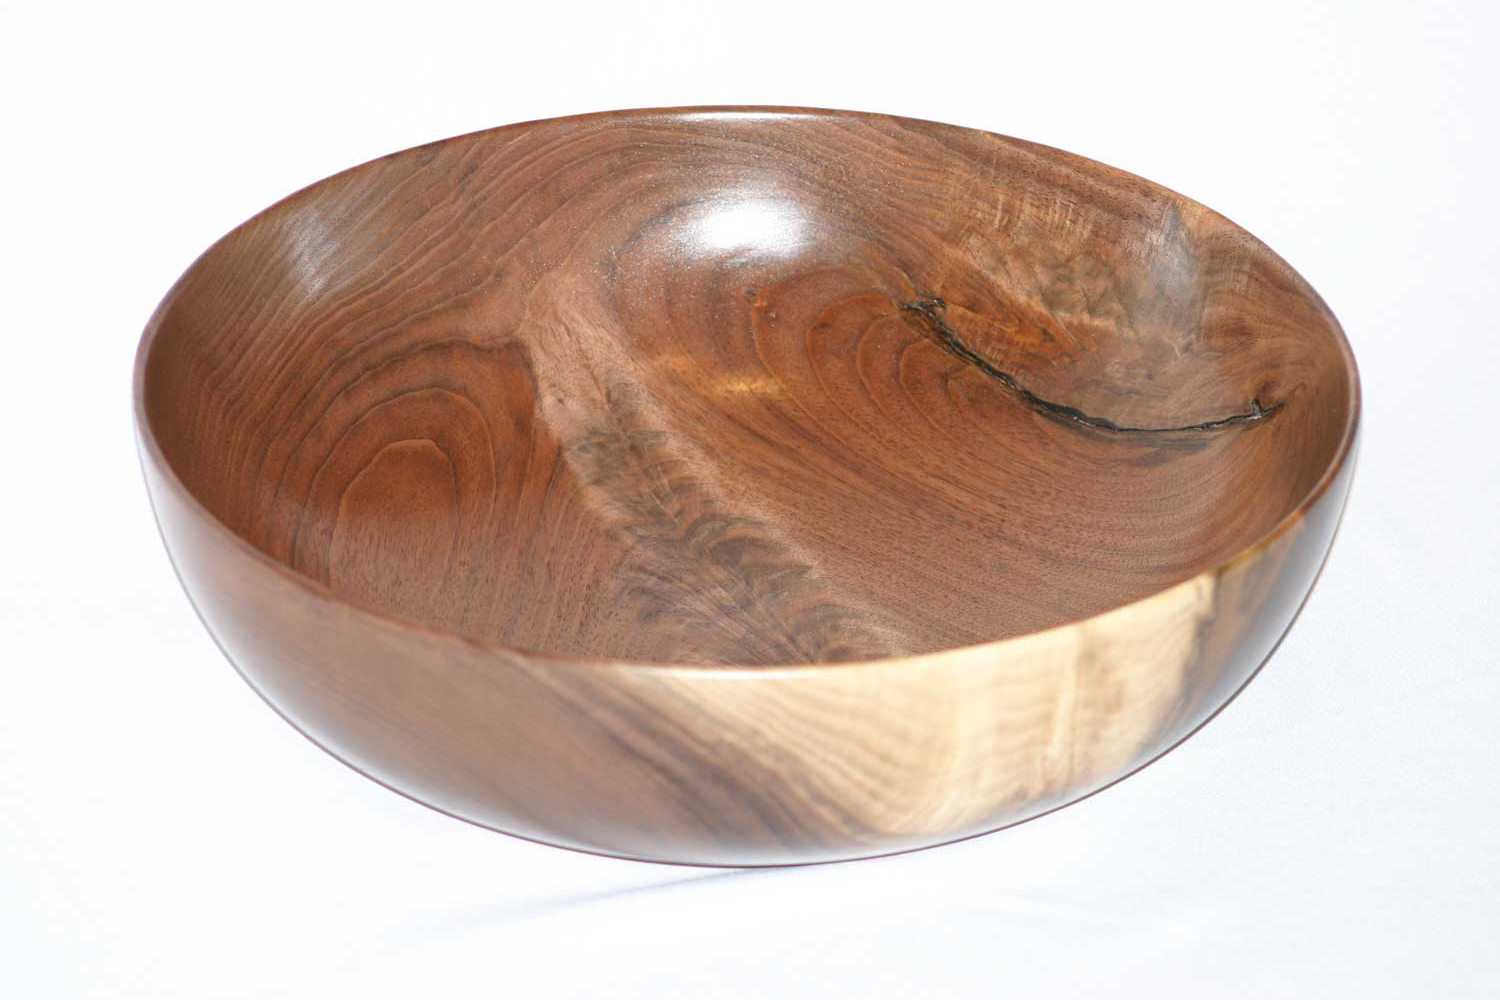 Sustainably sourced cherry & walnut hardwood 5 Handmade wooden bowl Handcrafted Artisan serving bowl Housewarming gift